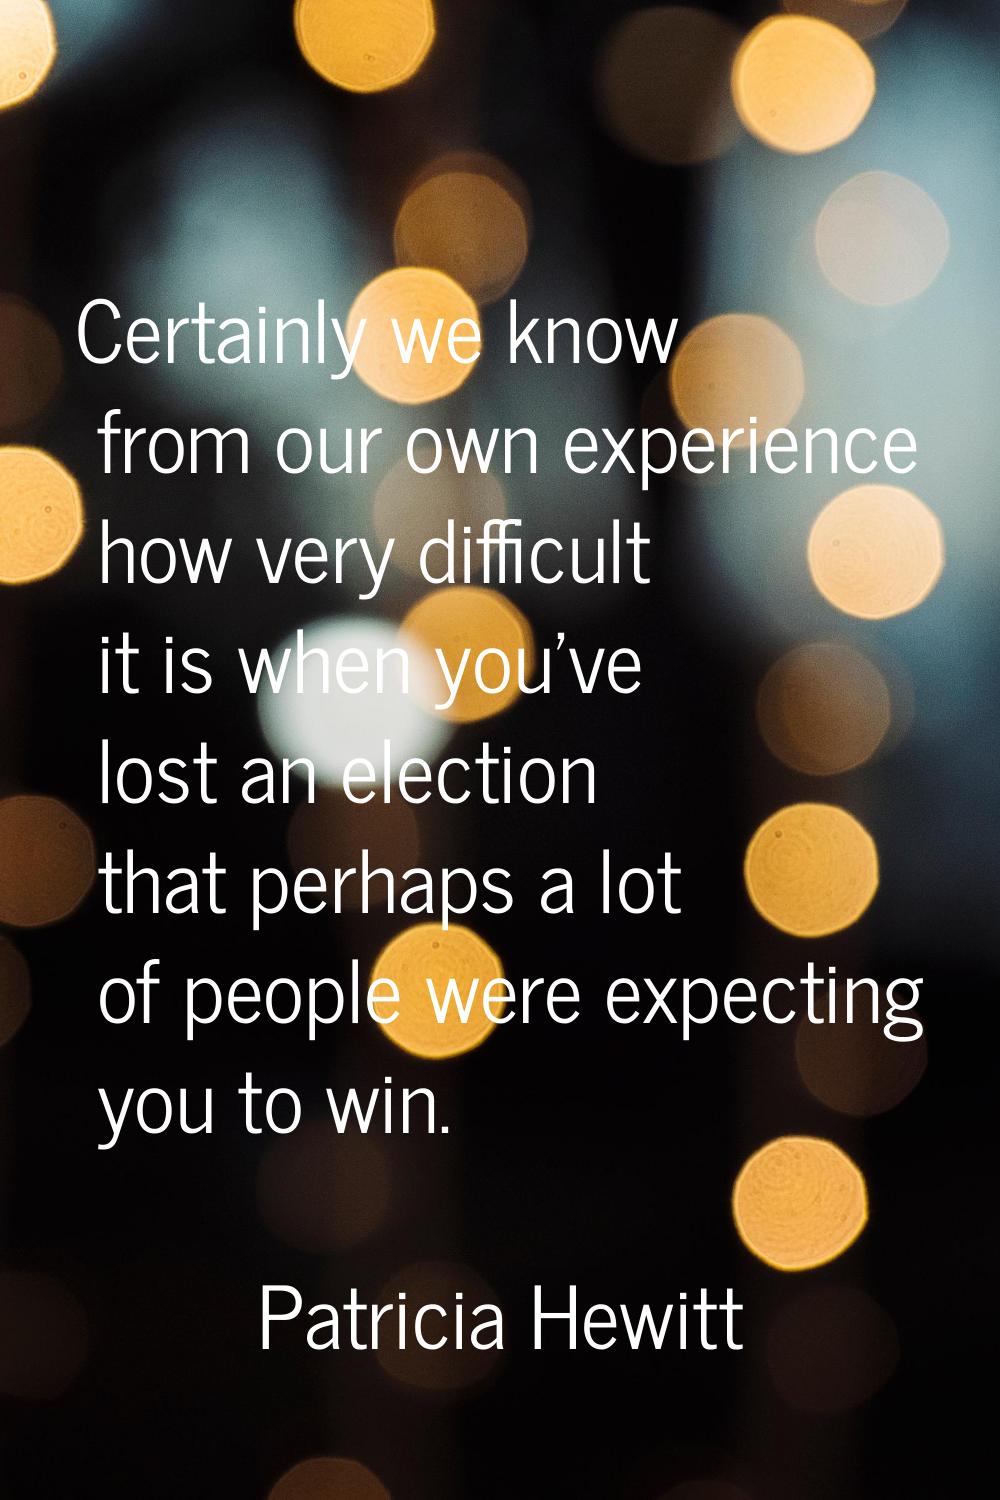 Certainly we know from our own experience how very difficult it is when you've lost an election tha